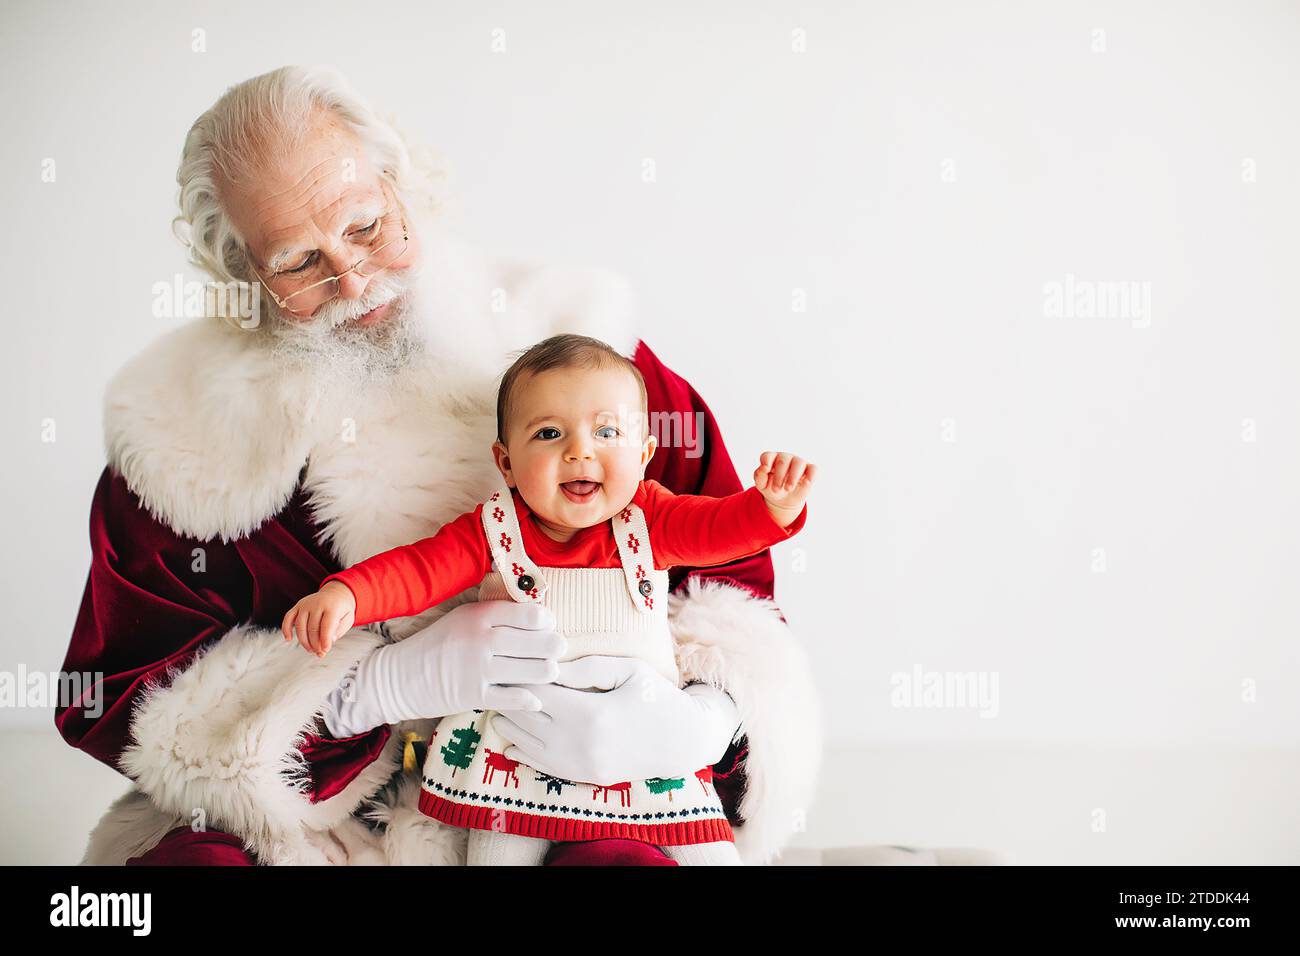 baby girl in christmas outfit sitting on santa's lap Stock Photo